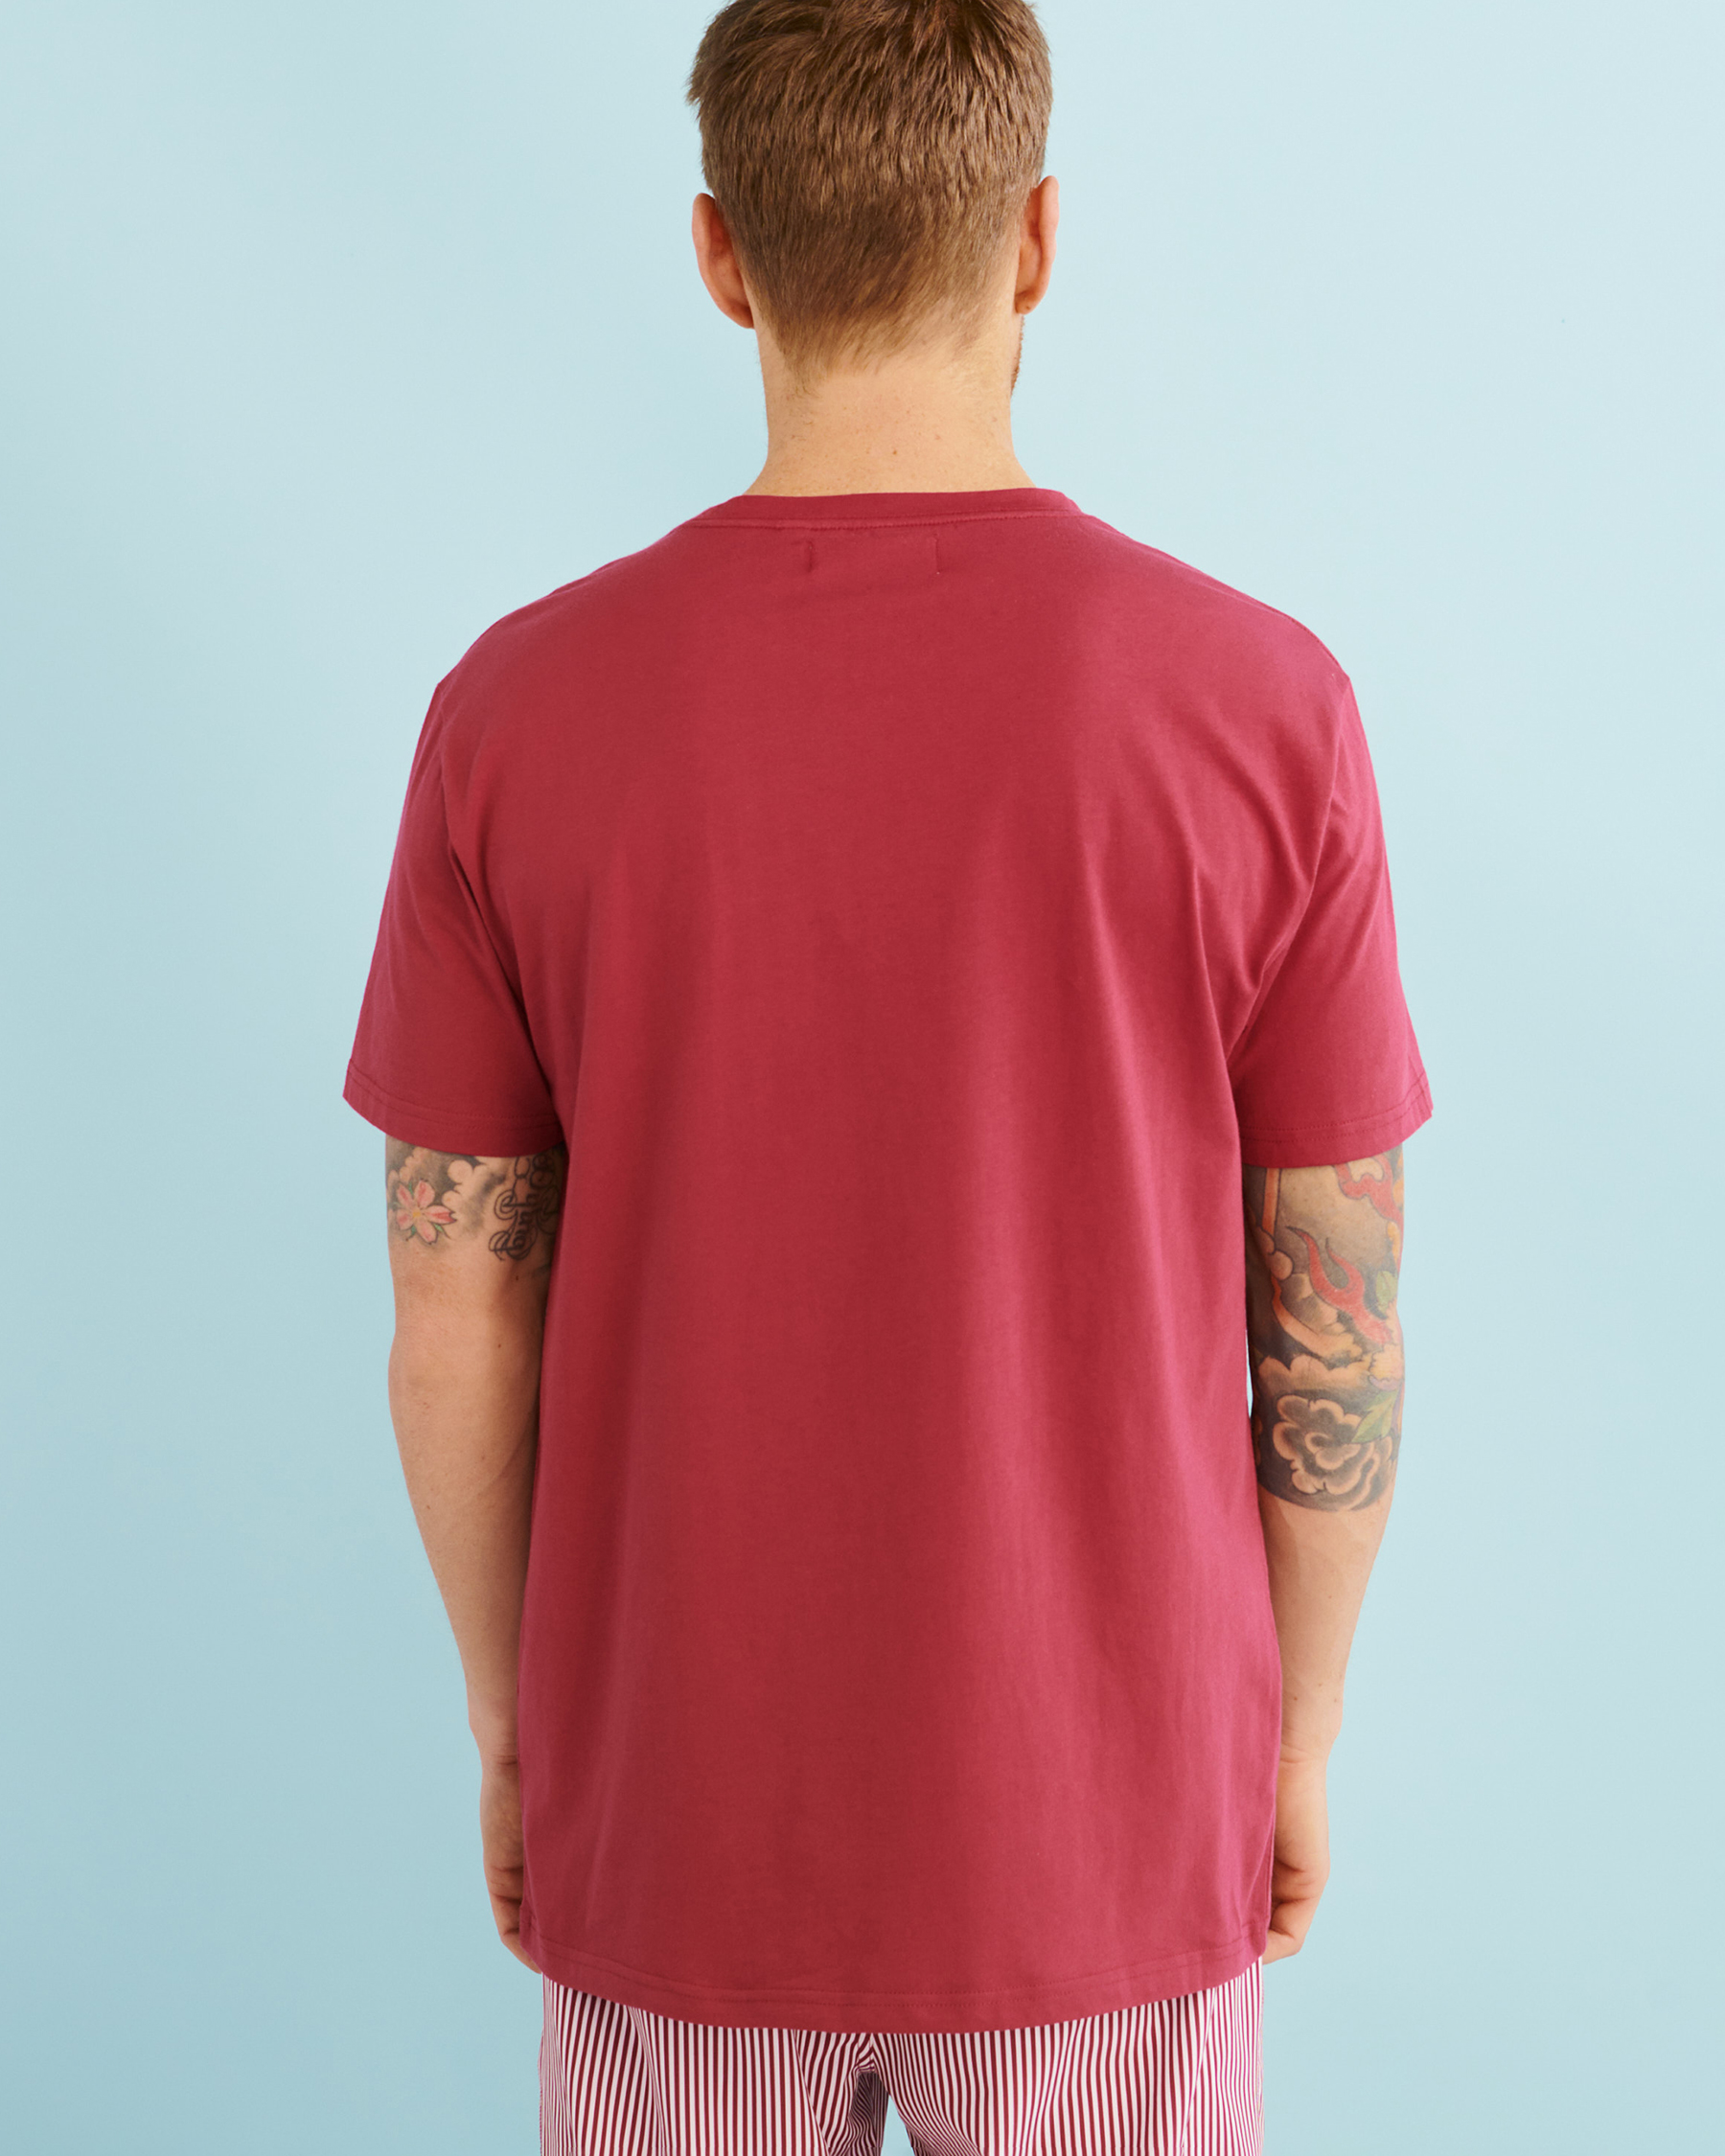 HAMABE Classic T-shirt Red 04100002 - View2